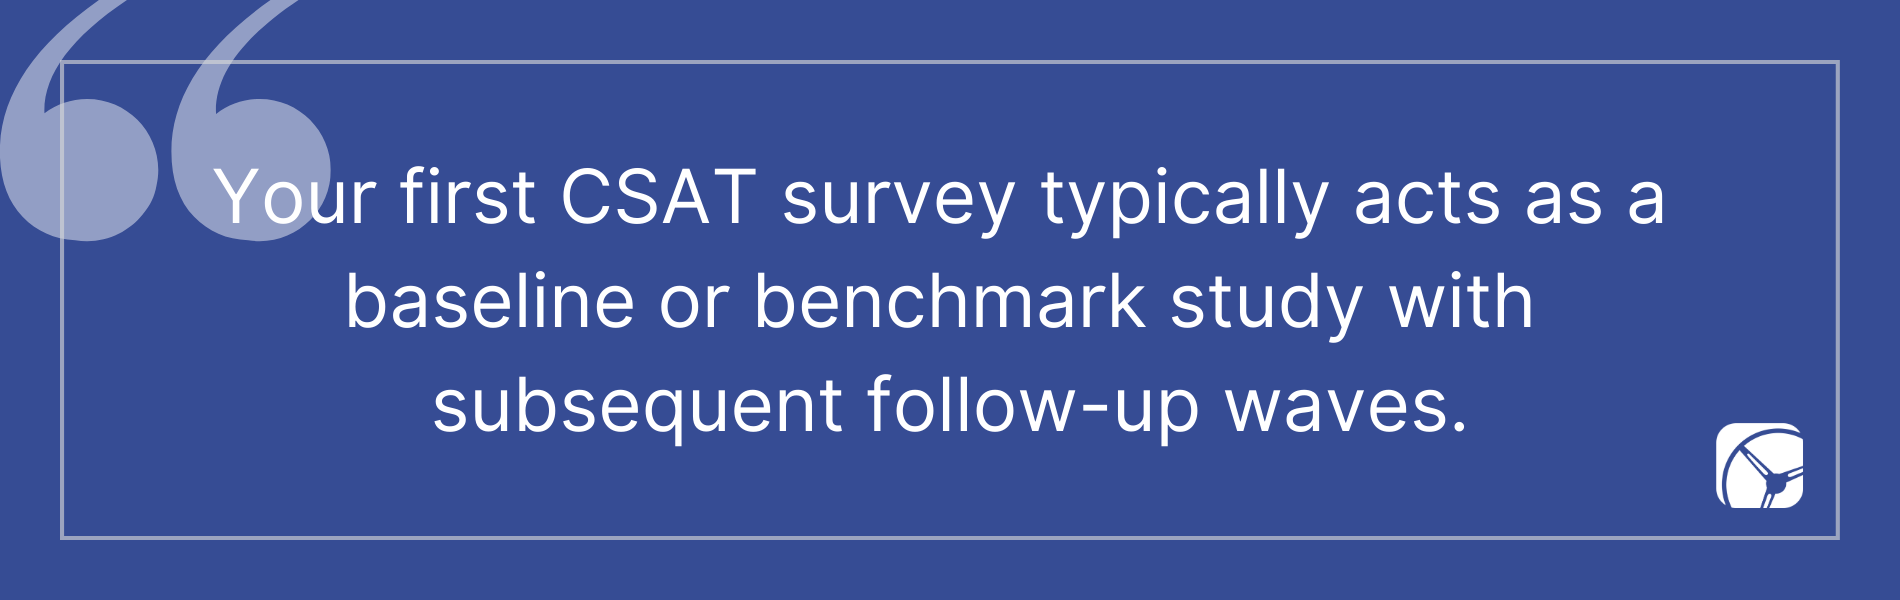 Your first CSAT survey typically acts as a  baseline or benchmark study with  subsequent follow-up waves.